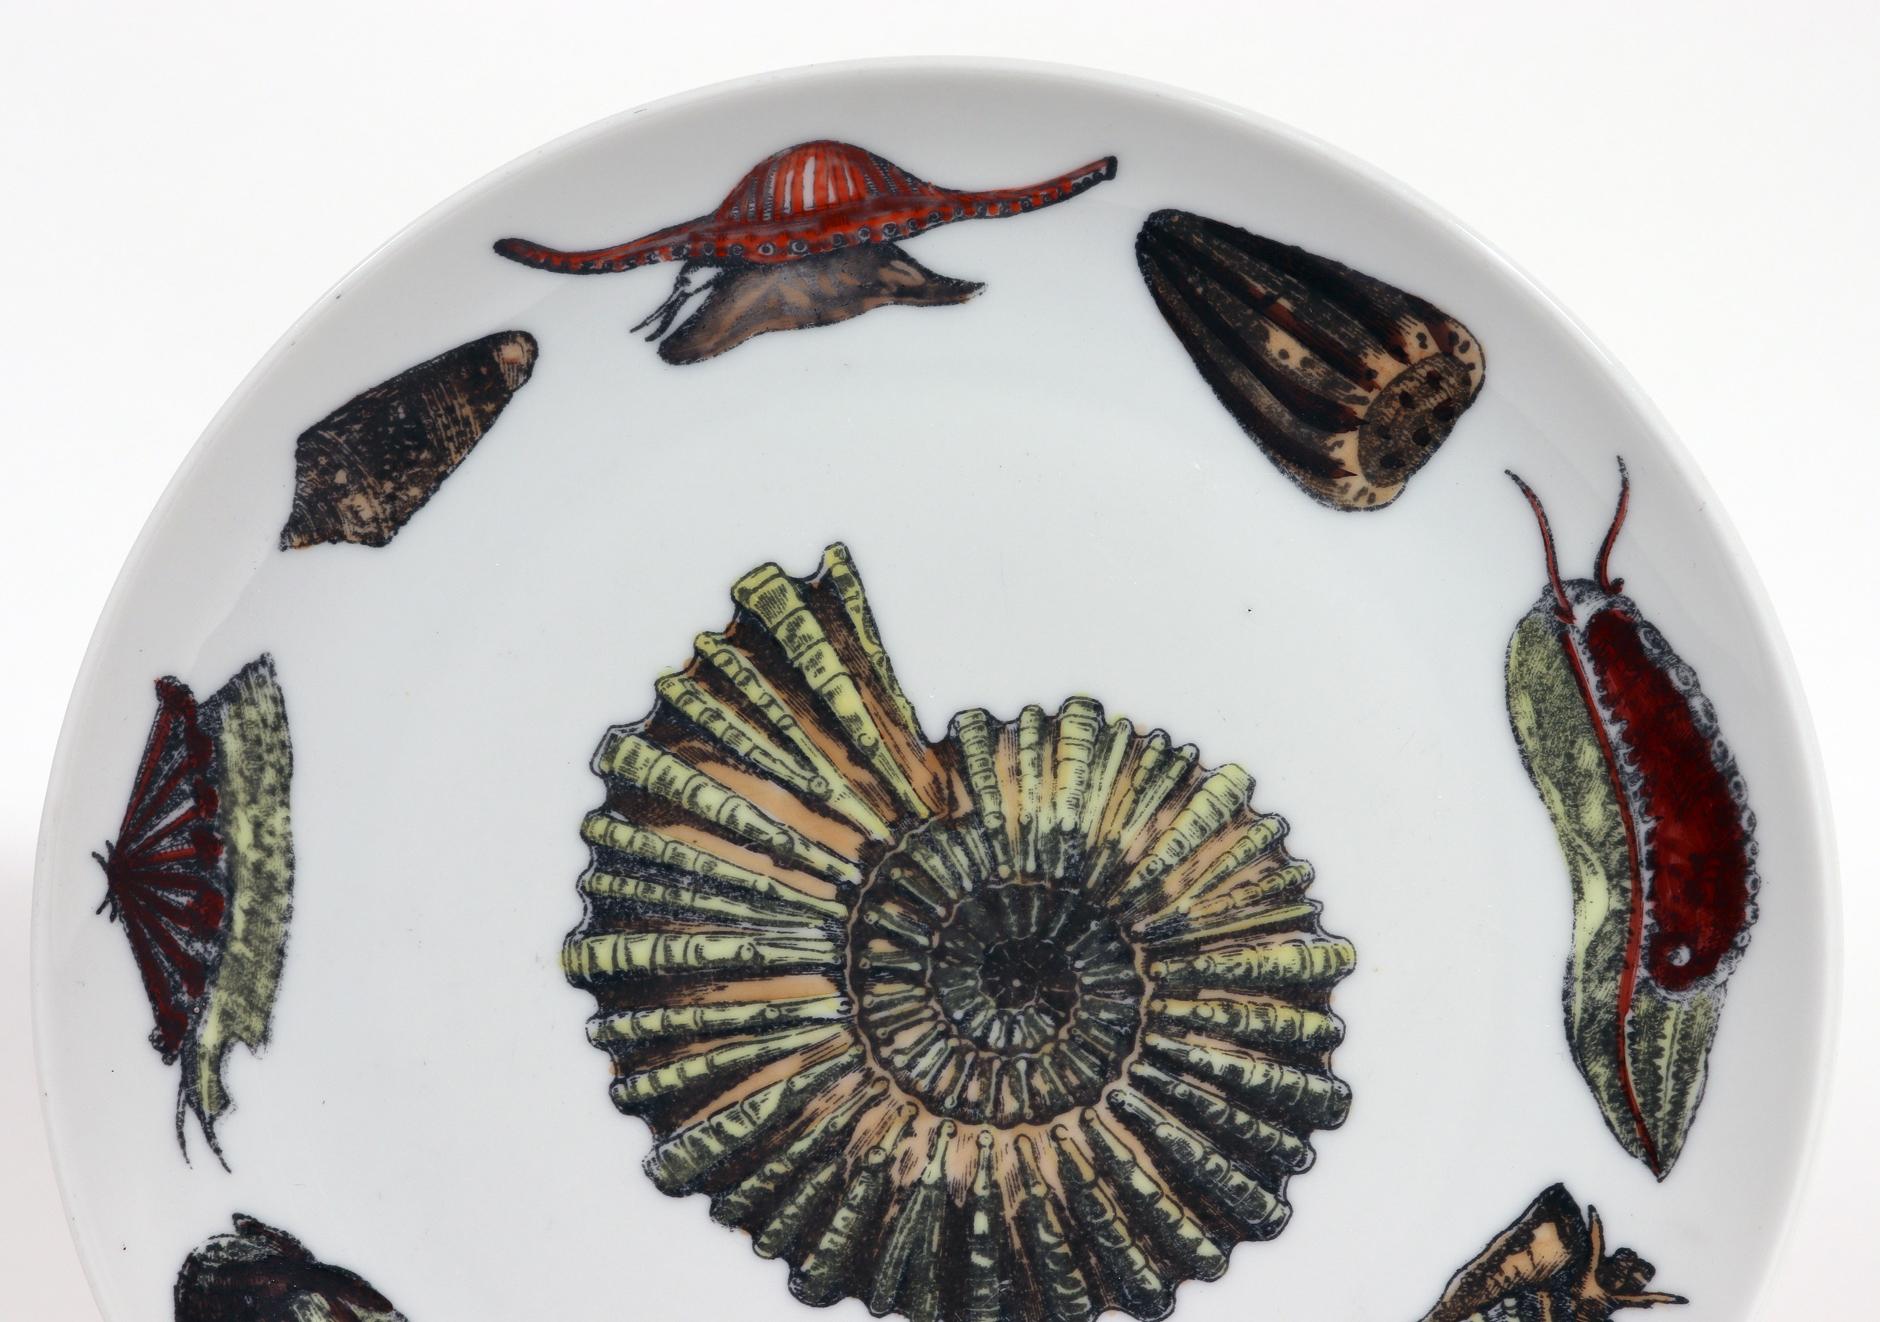 Italian Piero Fornasetti Porcelain Conchiglie Seashell Plate With Snails and Mollusks For Sale